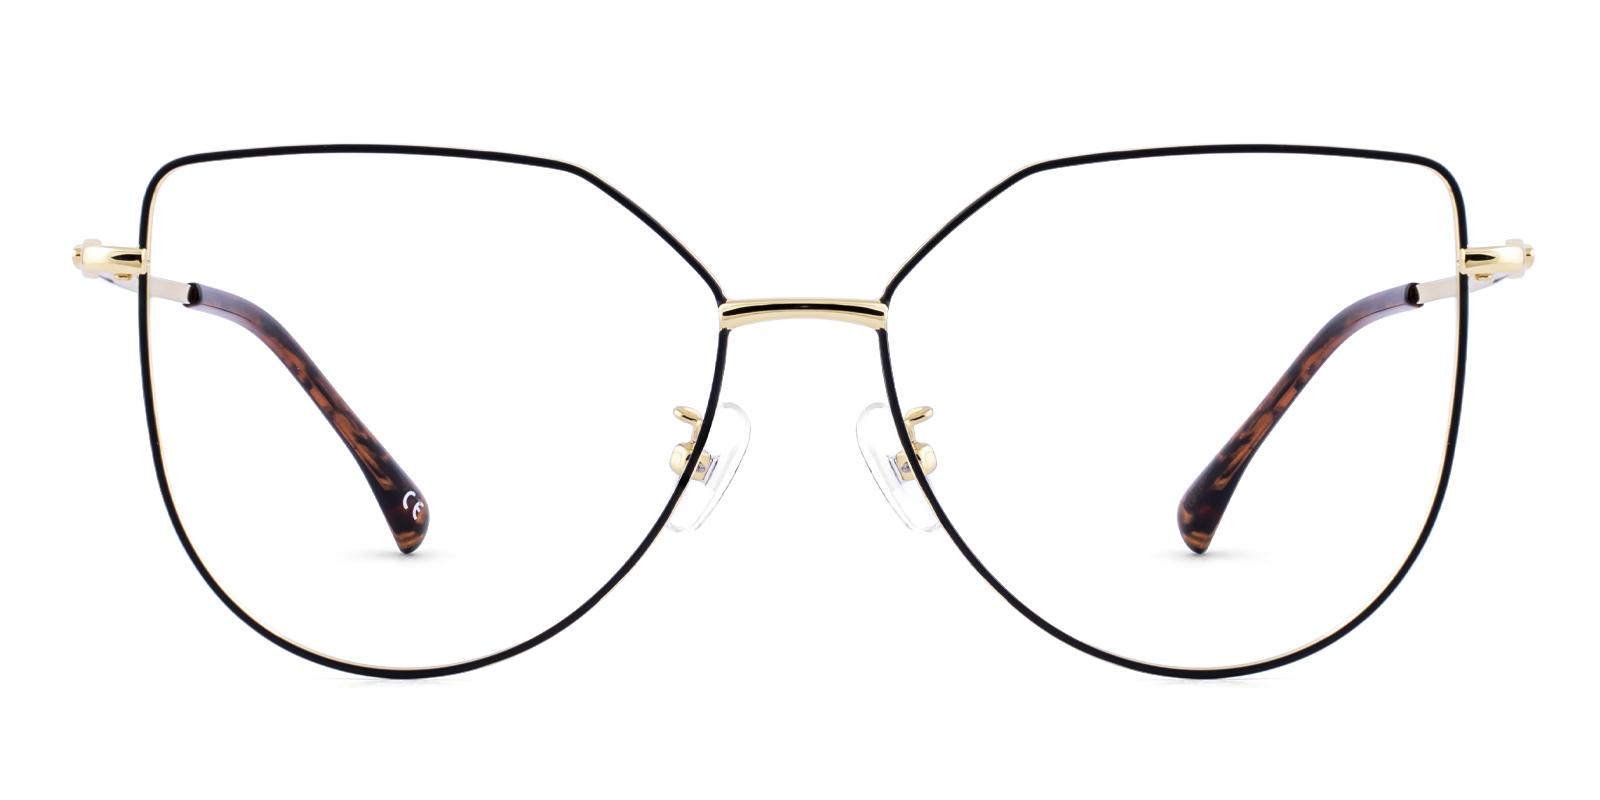 Pastth Gold Metal Eyeglasses , NosePads Frames from ABBE Glasses